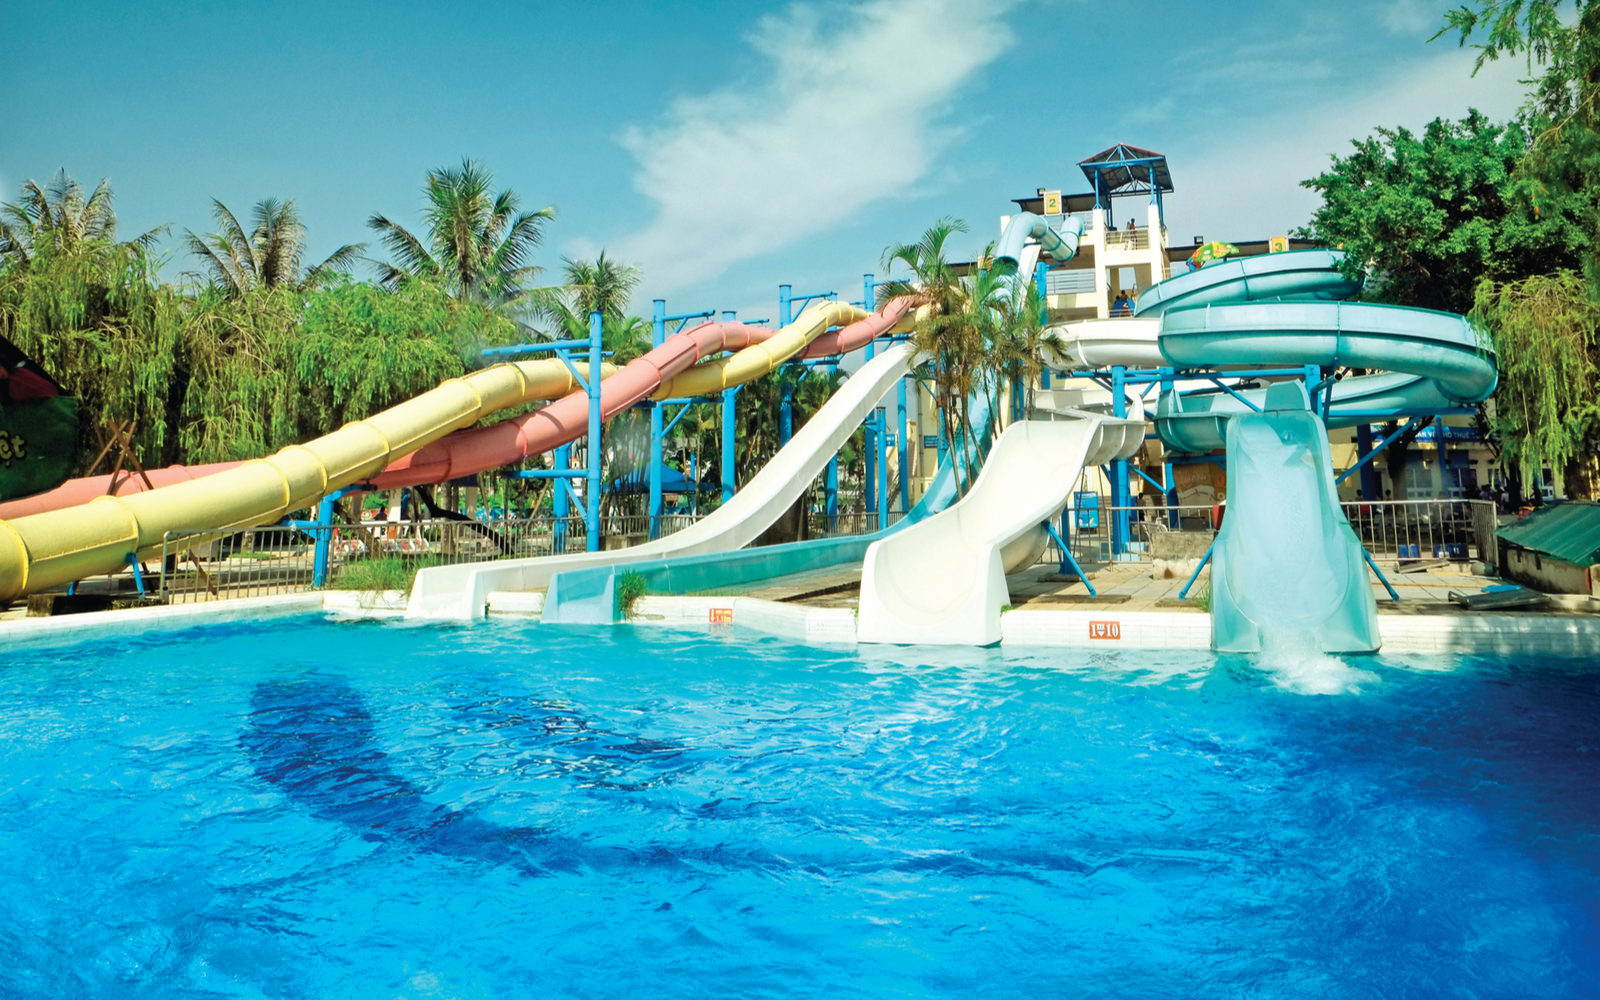 15 Best Water Parks in the USA in 2022